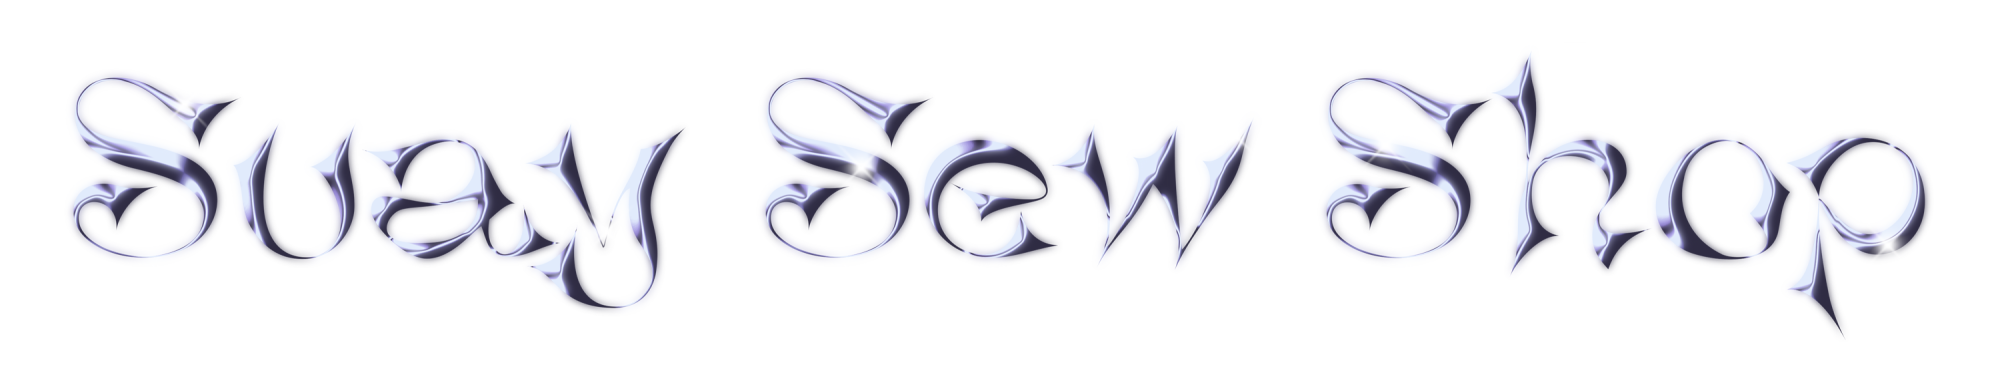 stylized type that reads “Suay Sew Shop”